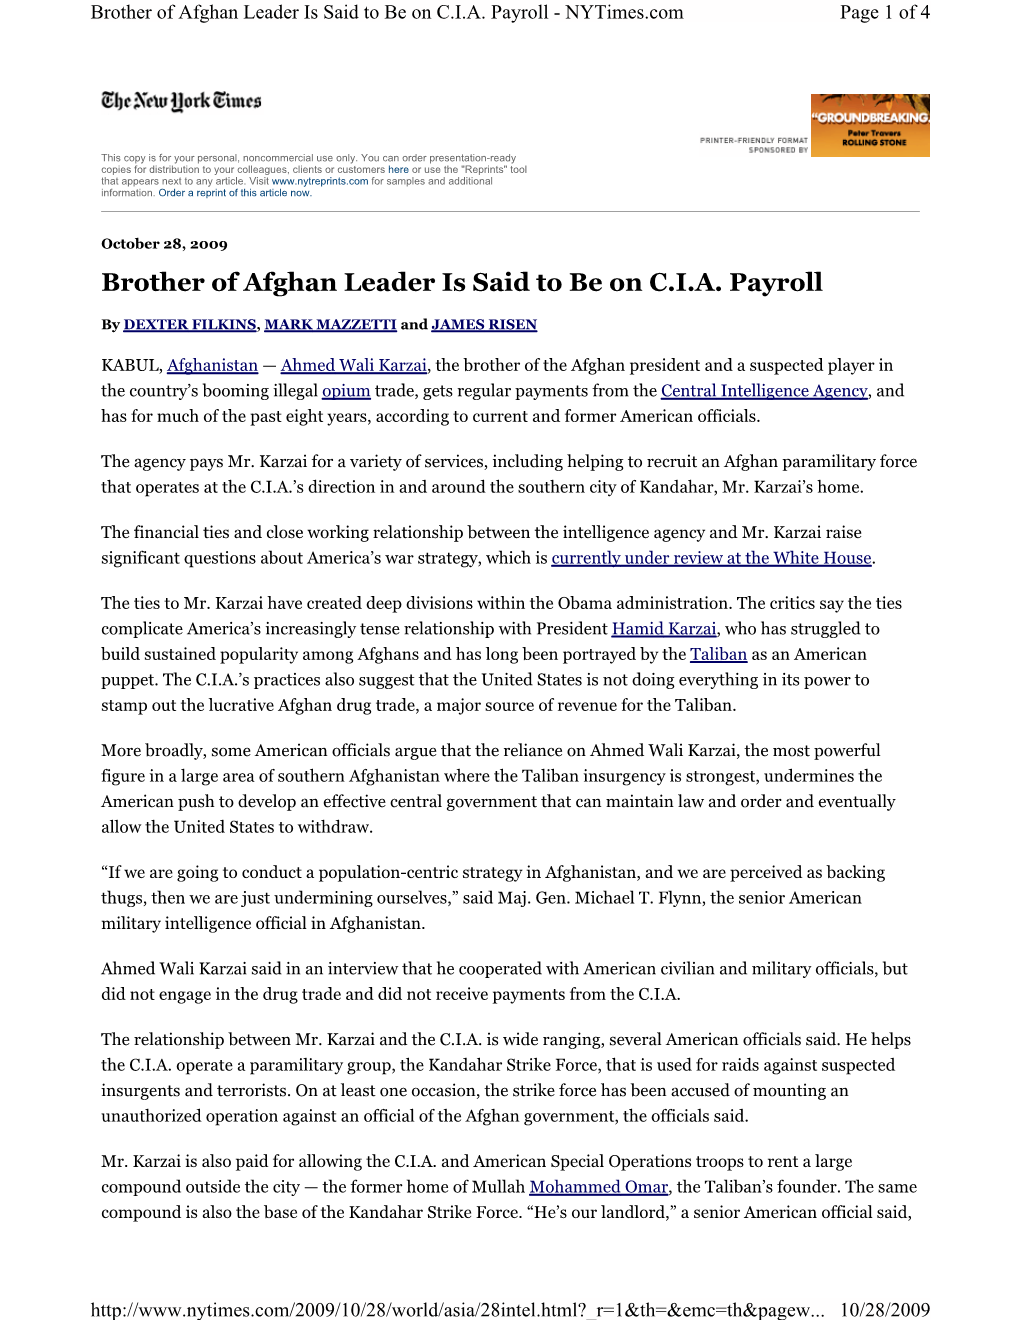 Brother of Afghan Leader Is Said to Be on C.I.A. Payroll - Nytimes.Com Page 1 of 4